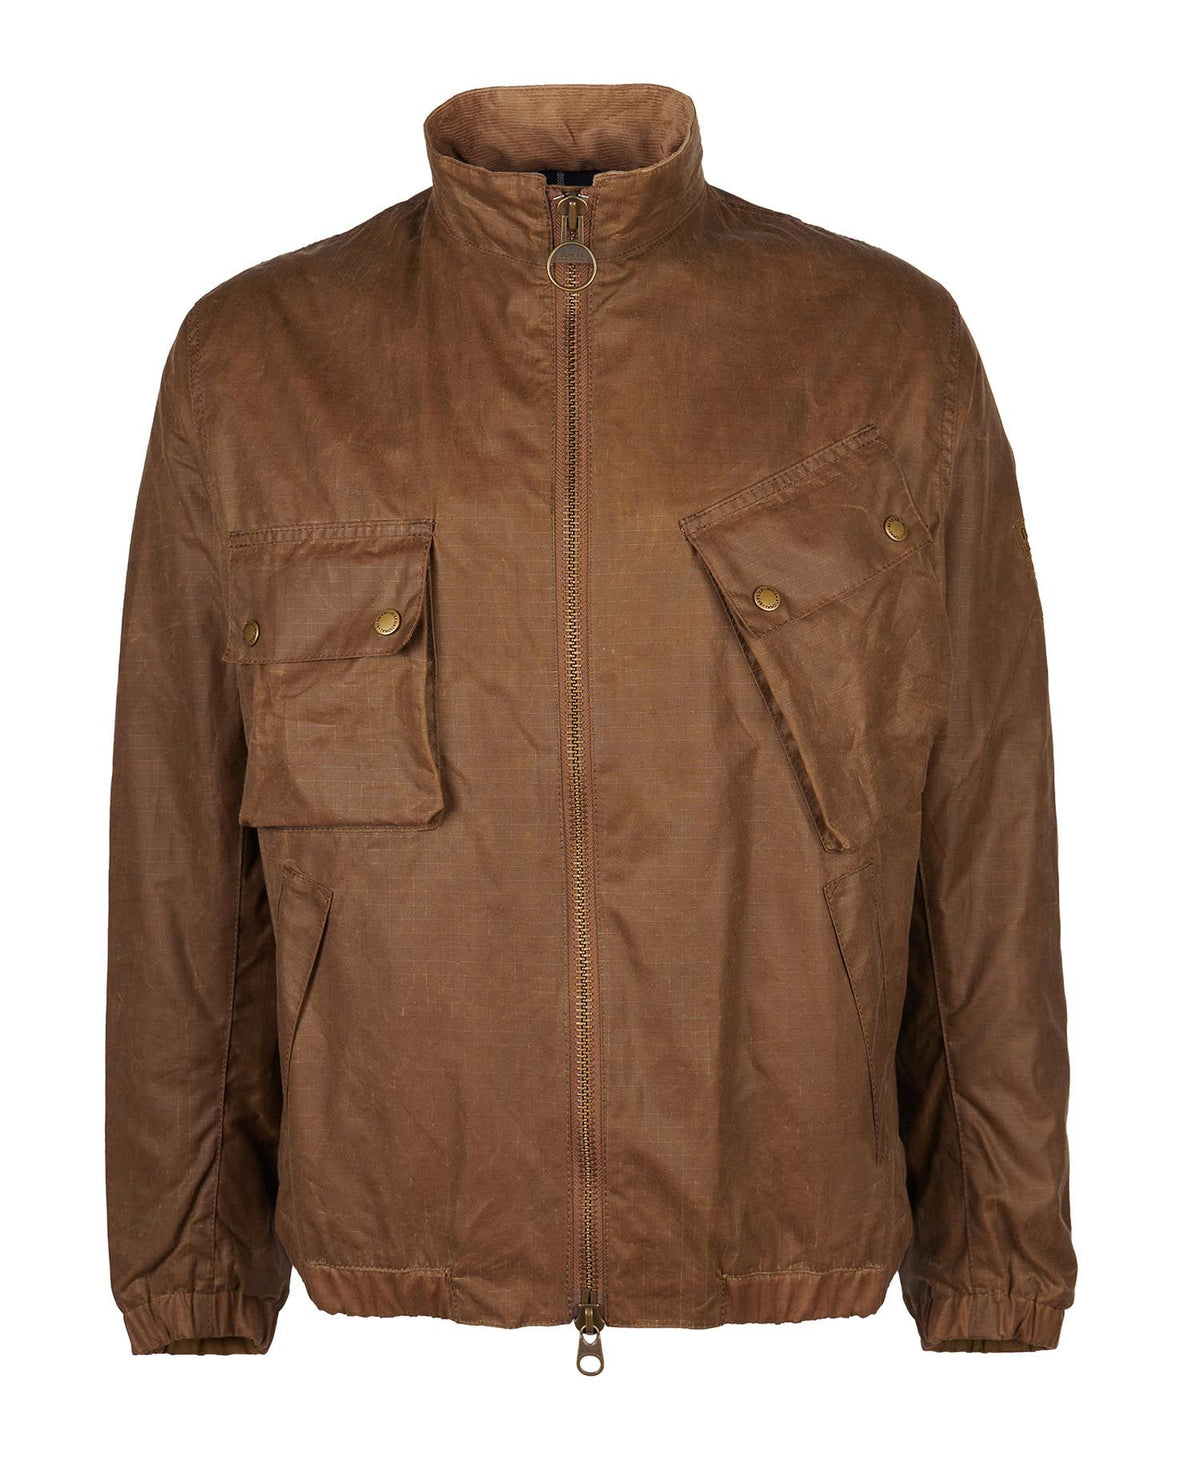 Barbour International SMQ Roslin Jacket - Sand | Spiders Whitby